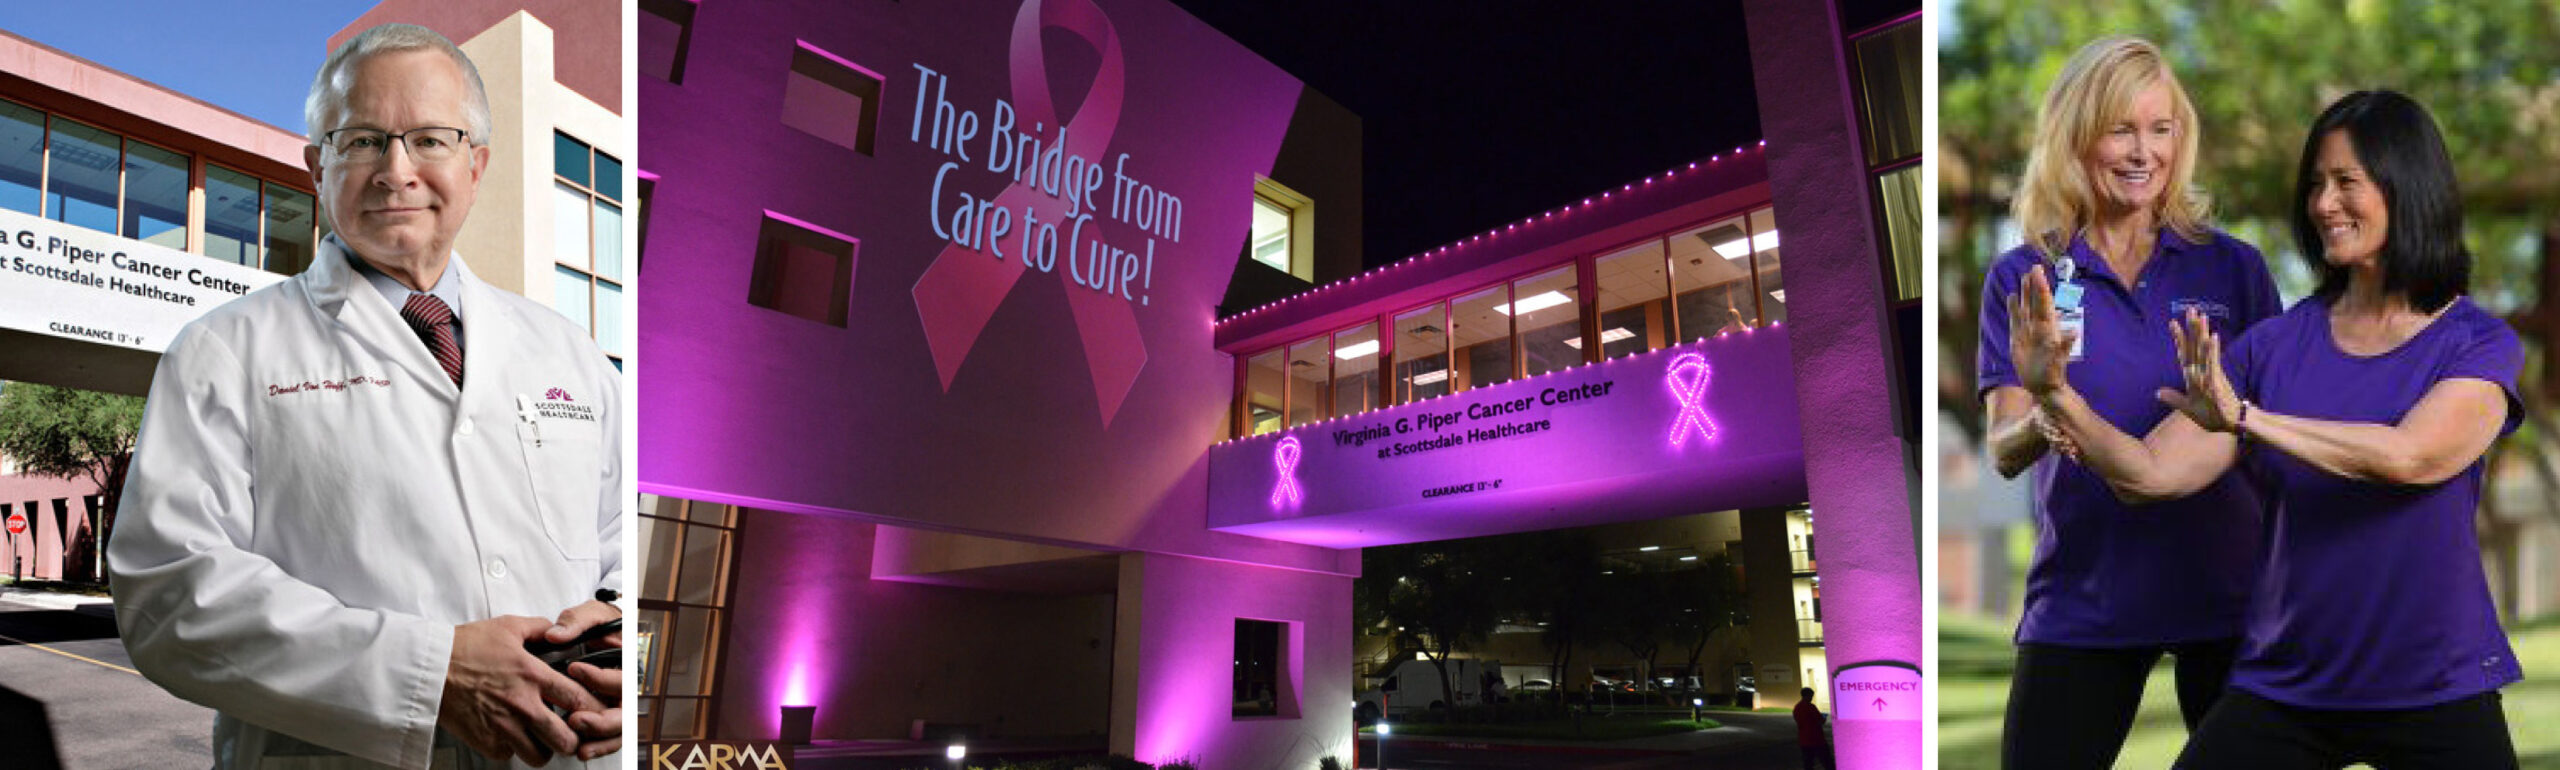 Virginia G. Piper Cancer Center is one of the best!